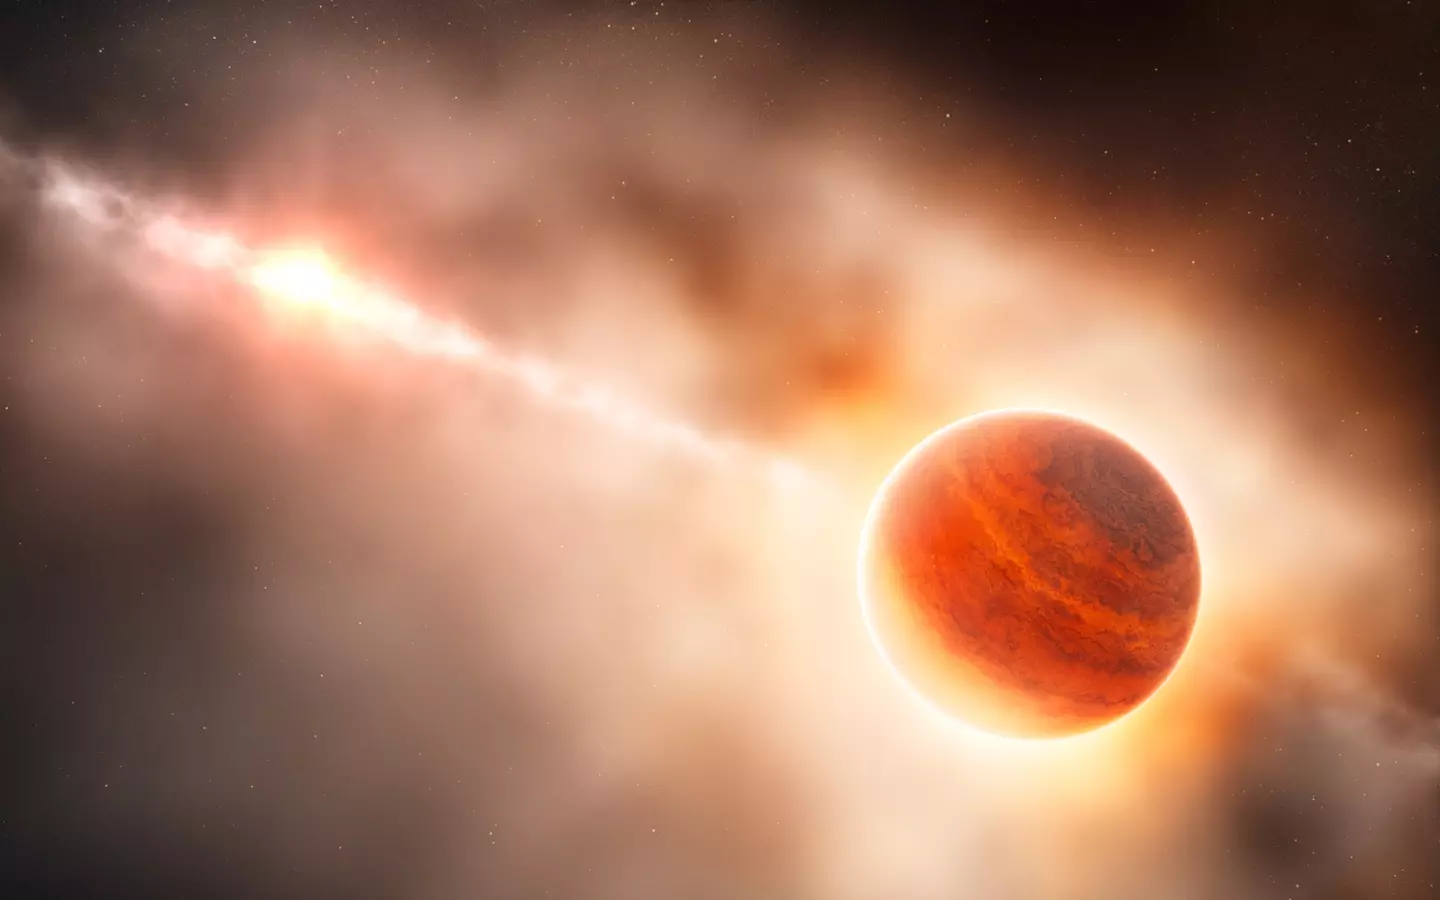 This artist’s impression shows the formation of a gas giant planet embedded in the disk of dust and gas in the ring of dust around a young star.